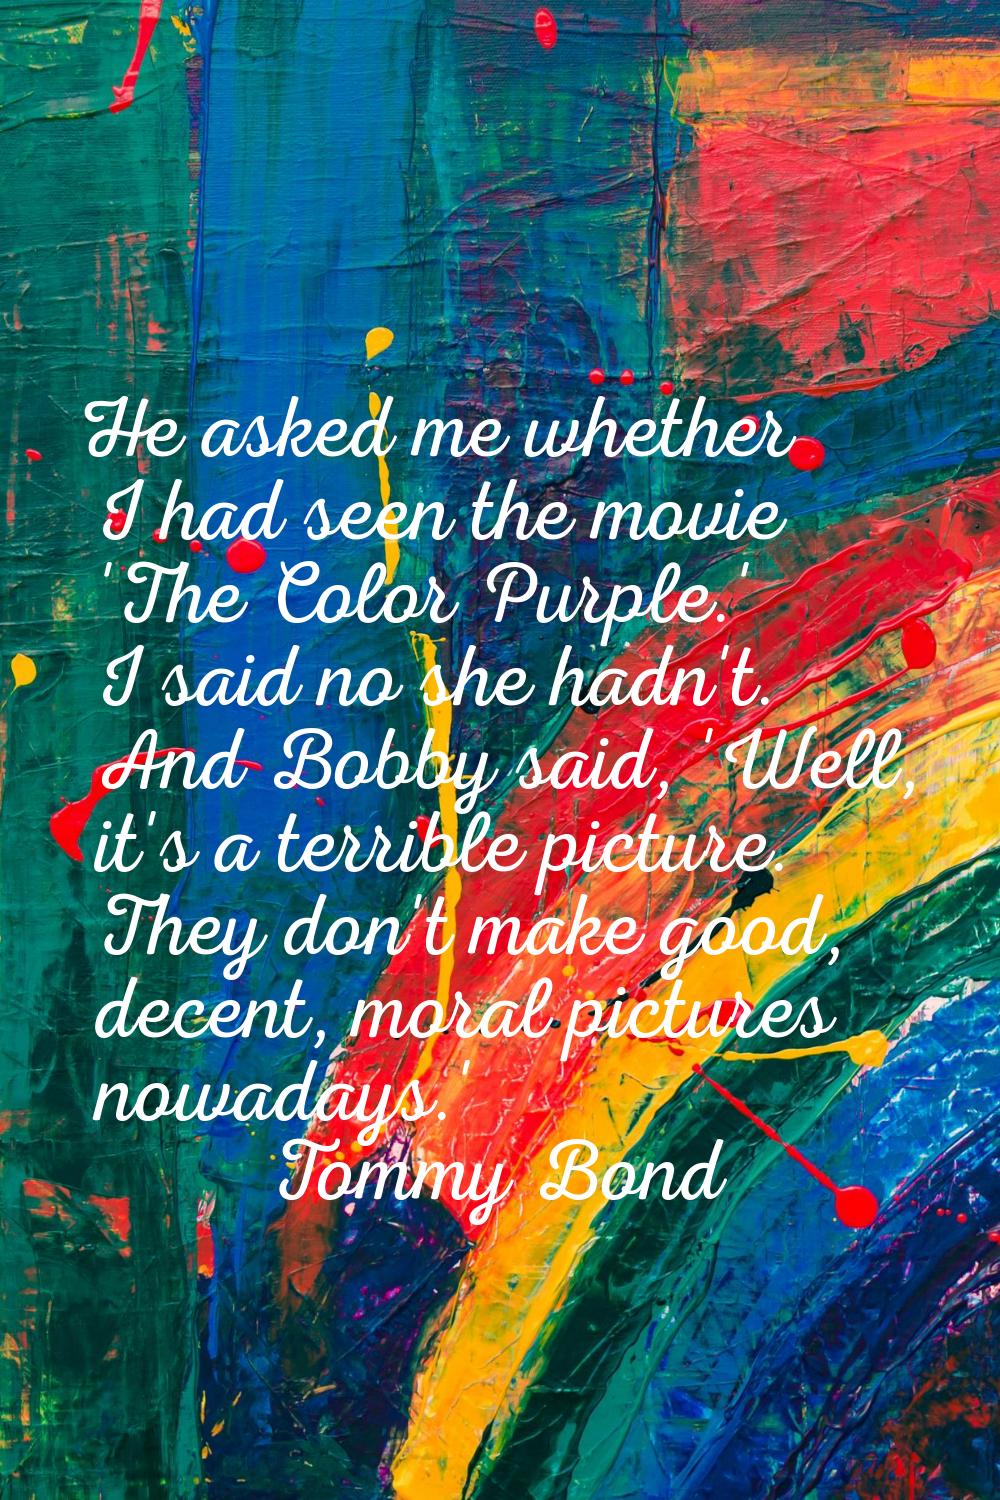 He asked me whether I had seen the movie 'The Color Purple.' I said no she hadn't. And Bobby said, 